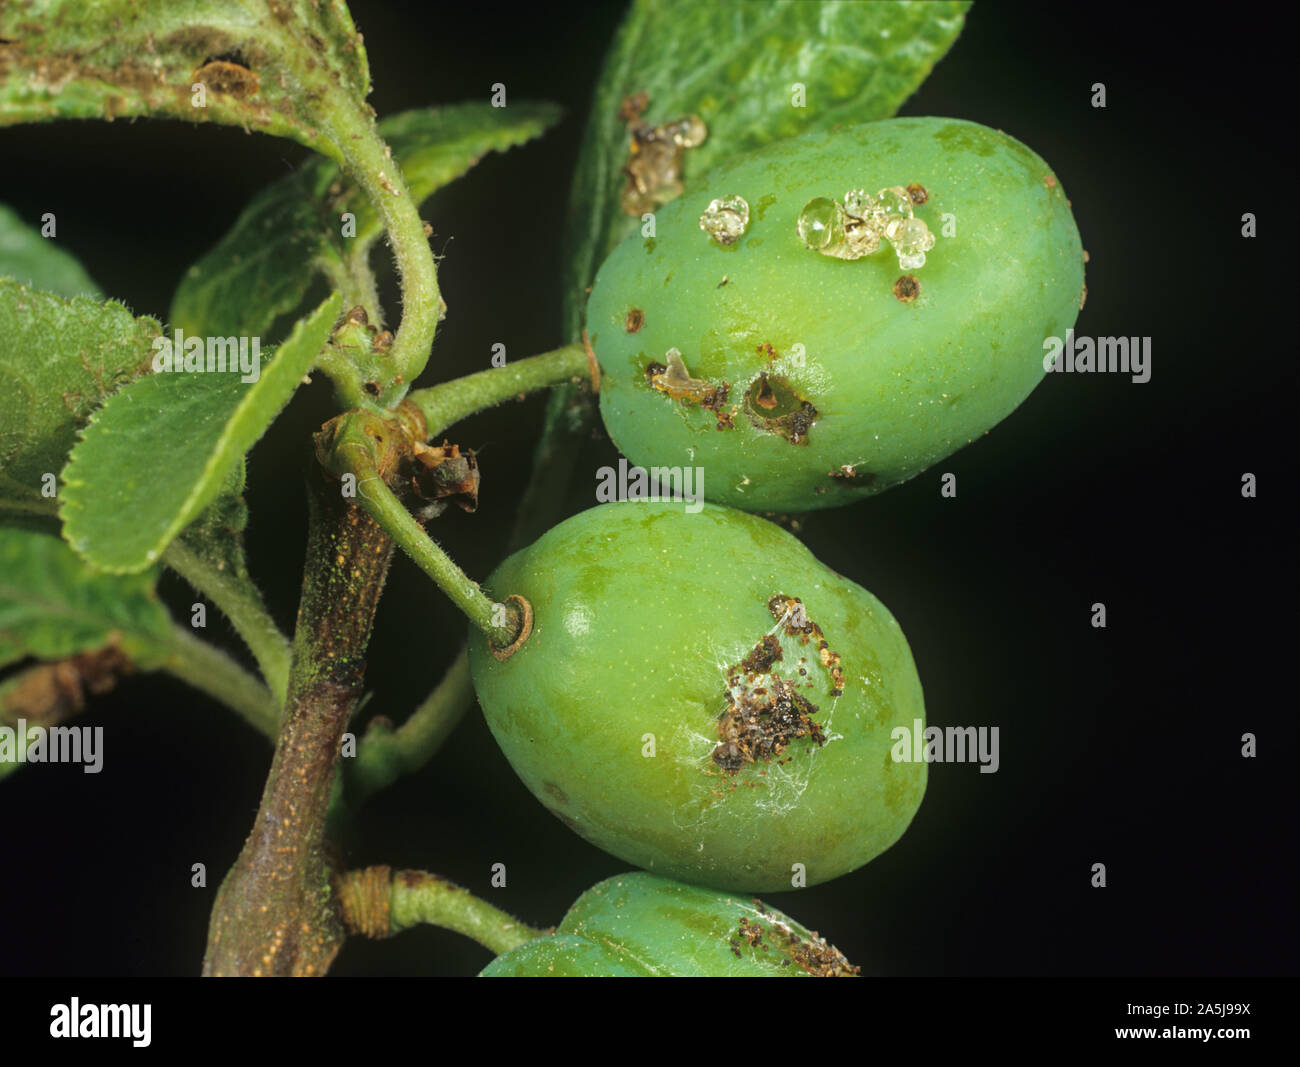 Damage and exudation gum caused by red plum maggot (Cydia funebrana) feeding on young plum fruit Stock Photo